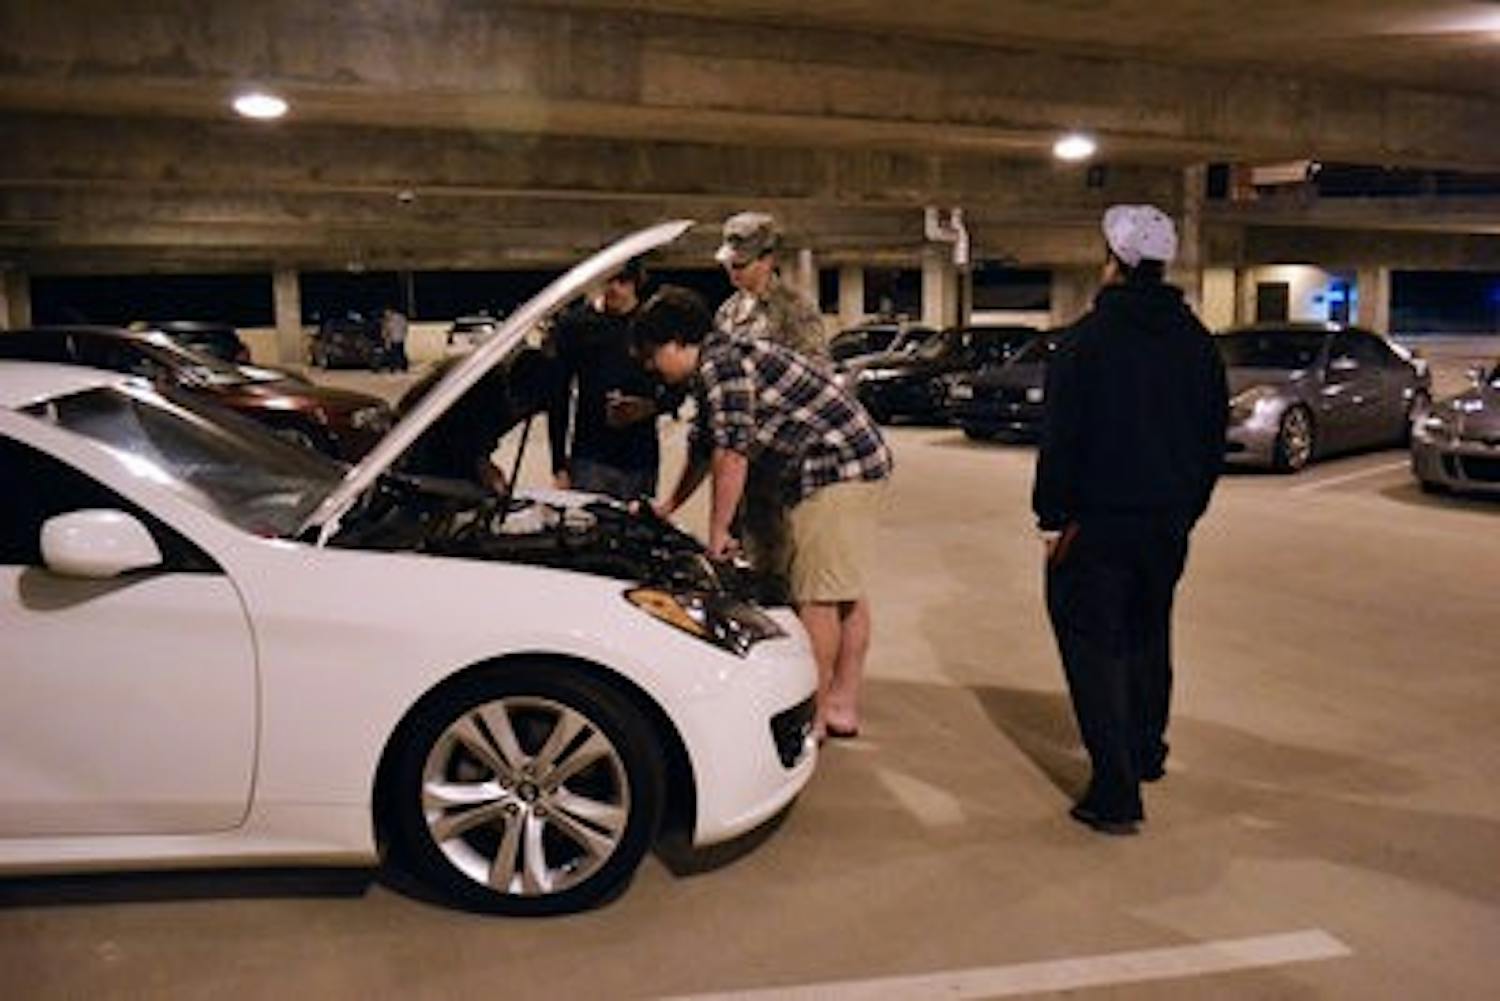 Ryan Flannery, freshman in mechanical enginnering, examines his car with fellow AUCtane members at their meeting in the South Quad parking deck Tuesday night. (Danielle Lowe / ASSISTANT PHOTO EDITOR)